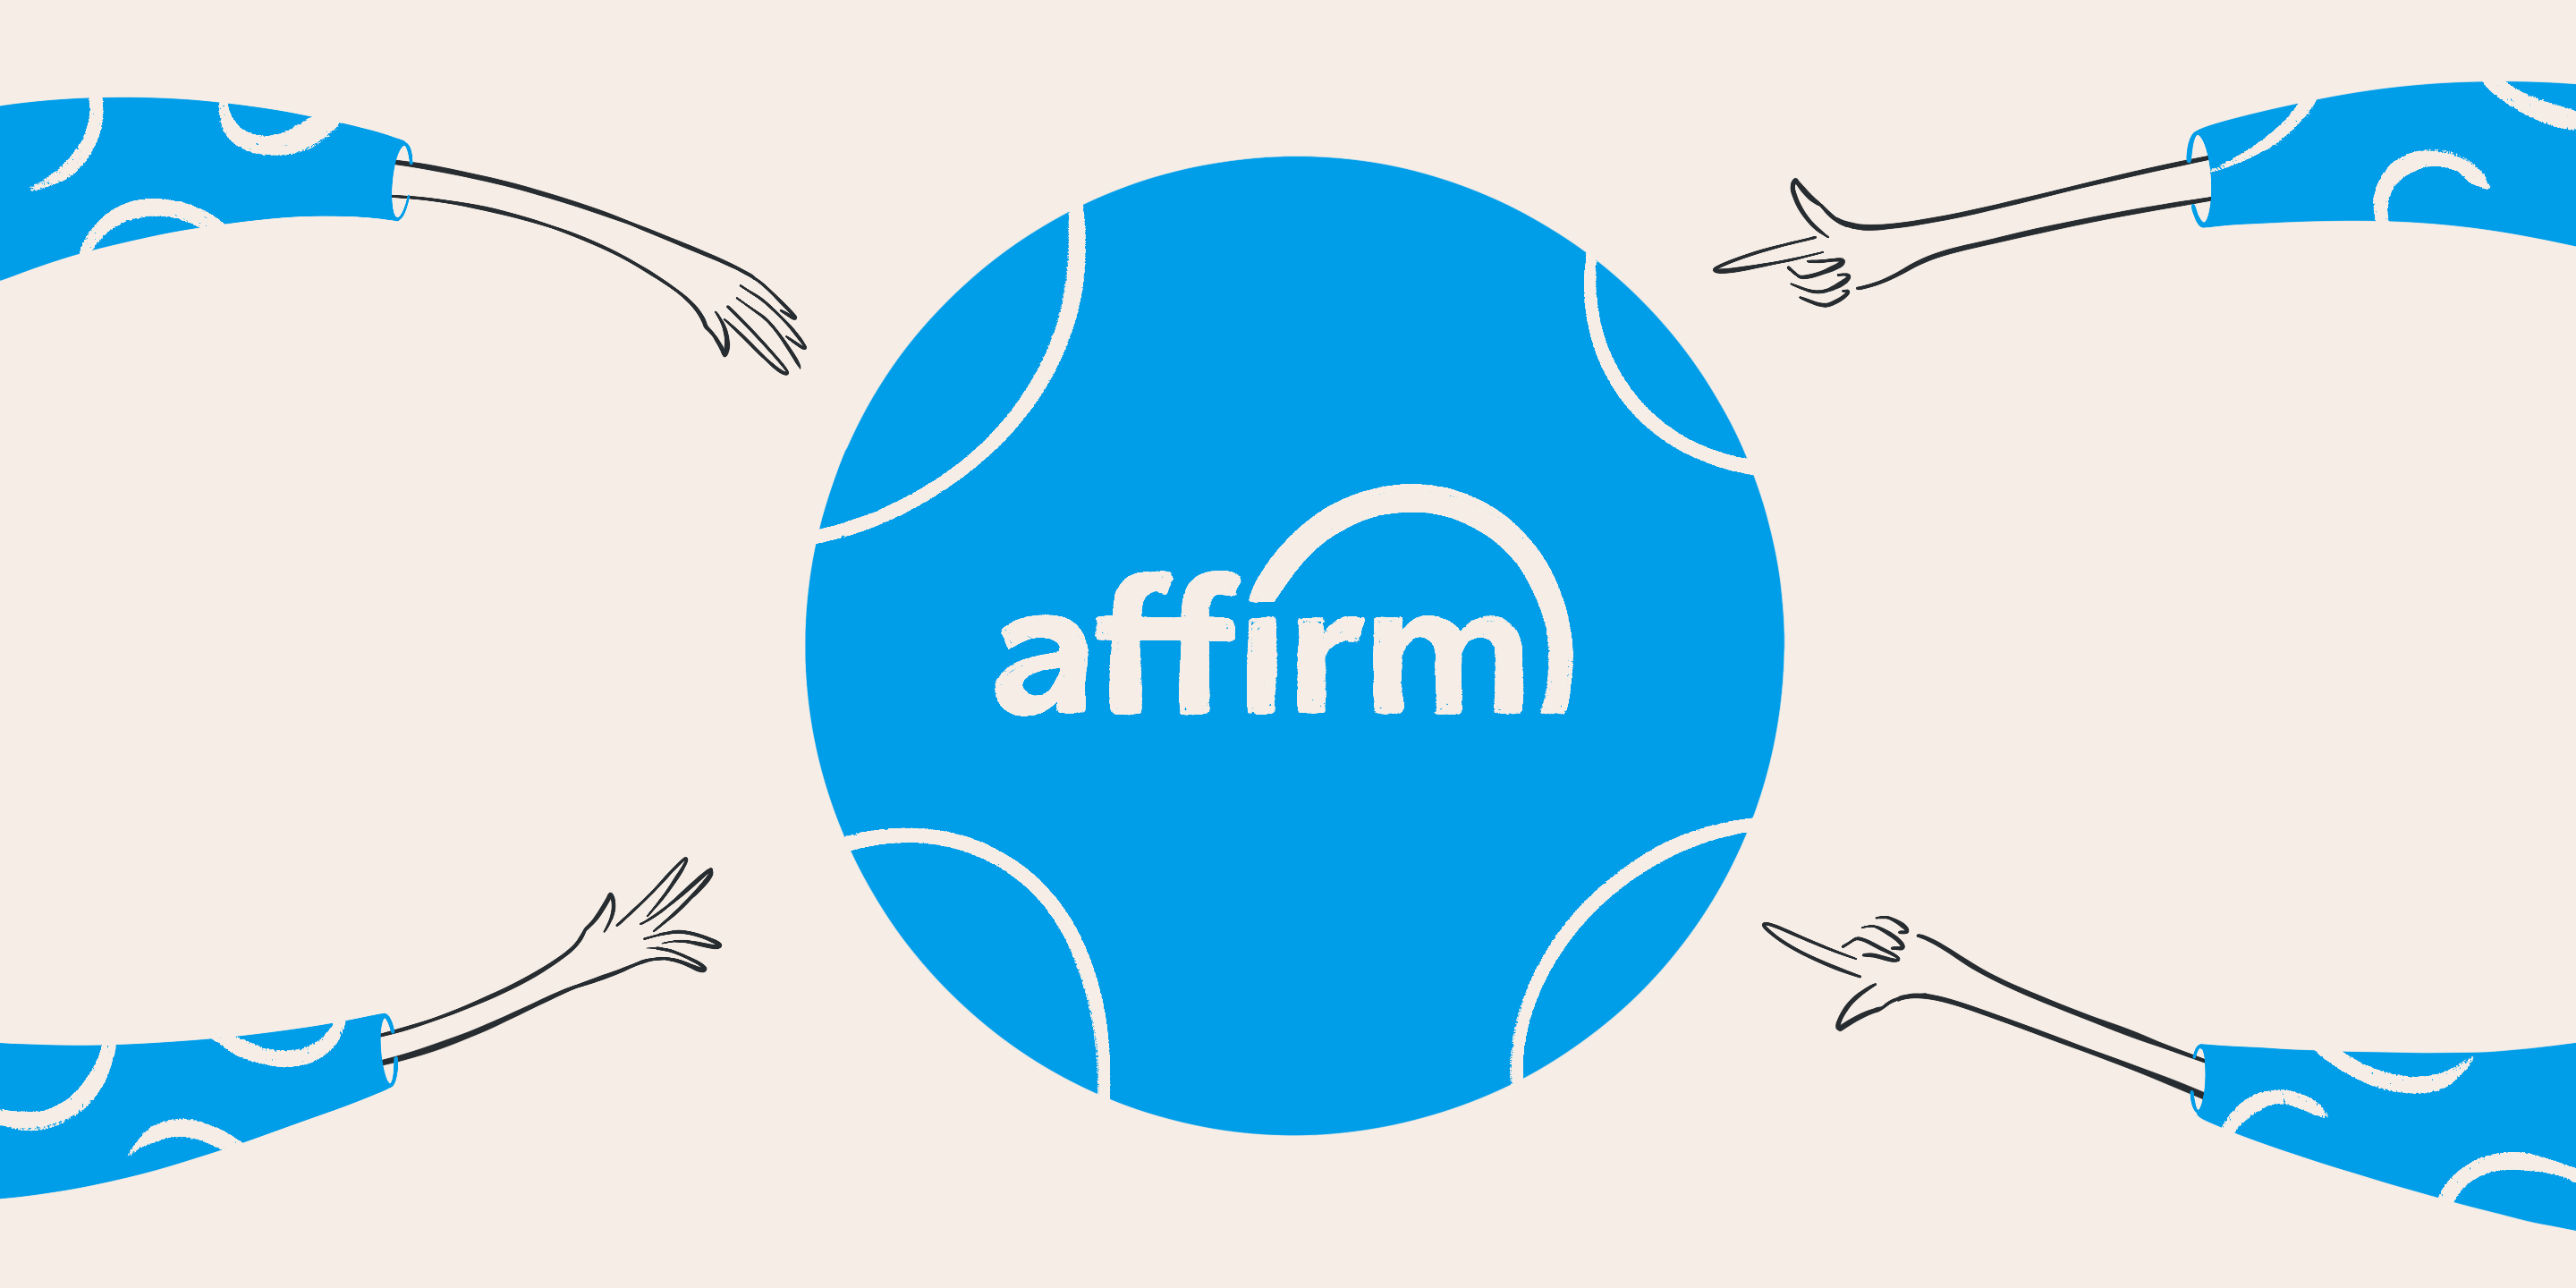 What to know about Affirm's 2021 IPO - Public - Commission ...